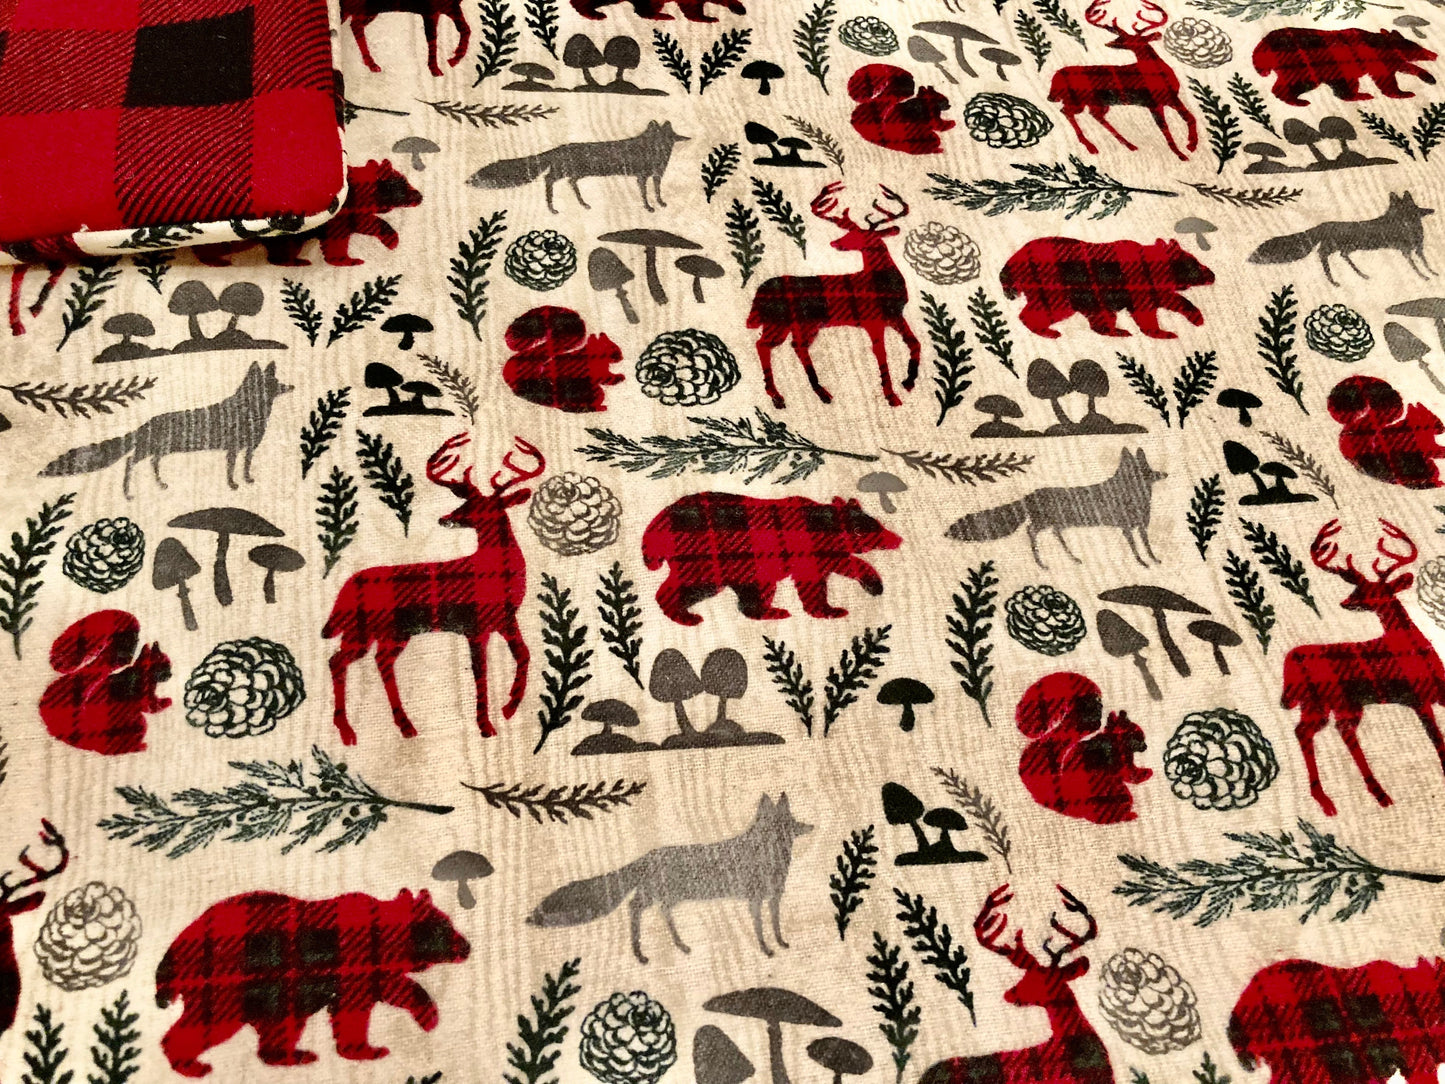 Must have cozy, warm cabin blanket with plaid, deer, bears and more